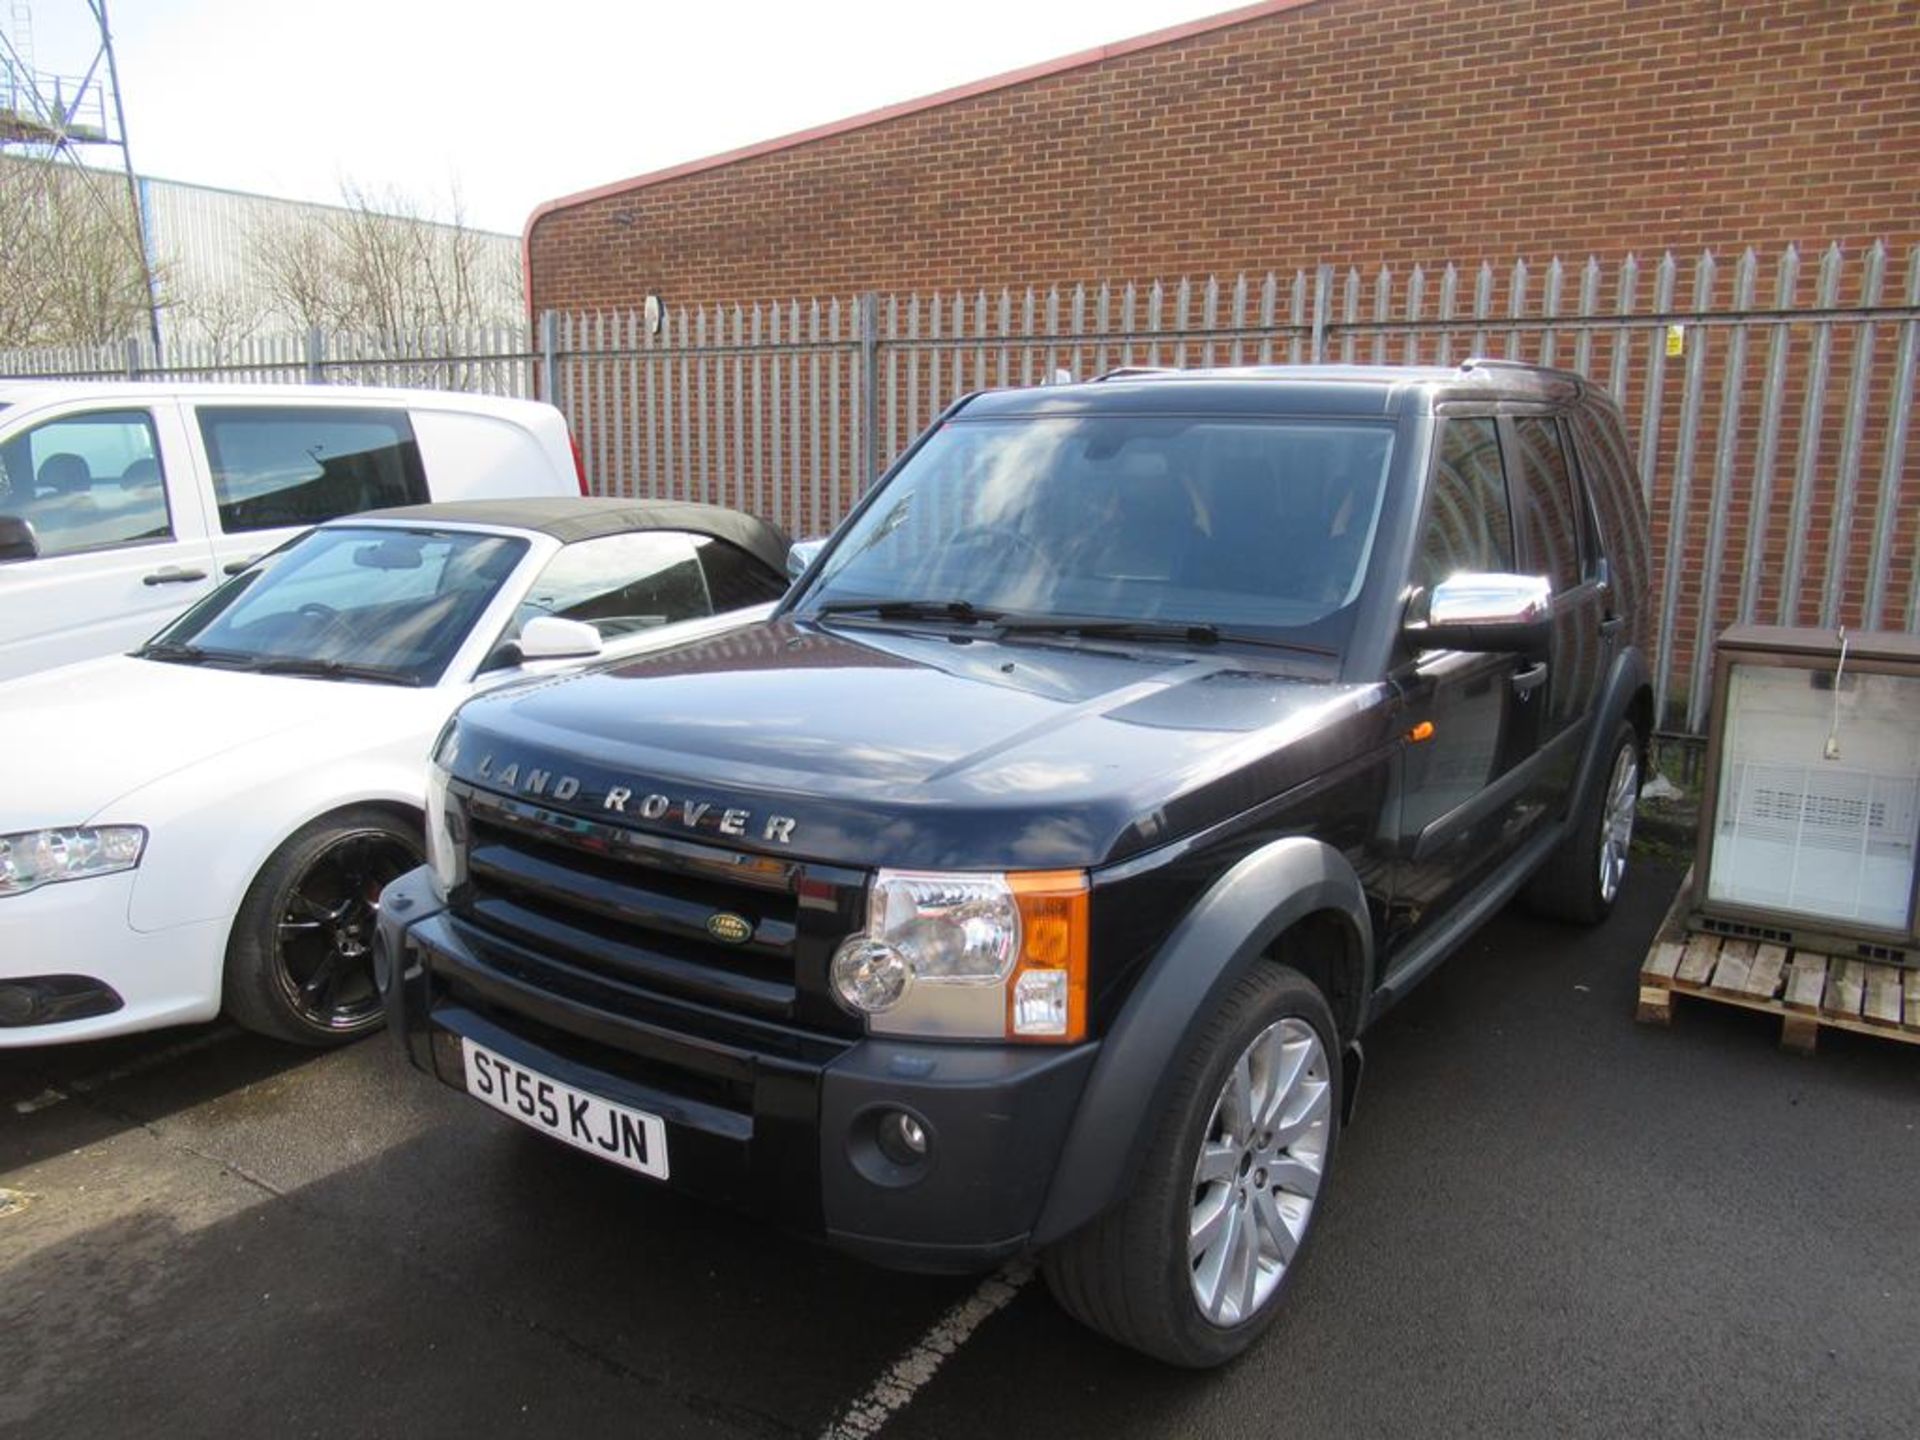 A Landrover Discovery 3 TDV6 S Auto - Image 3 of 16